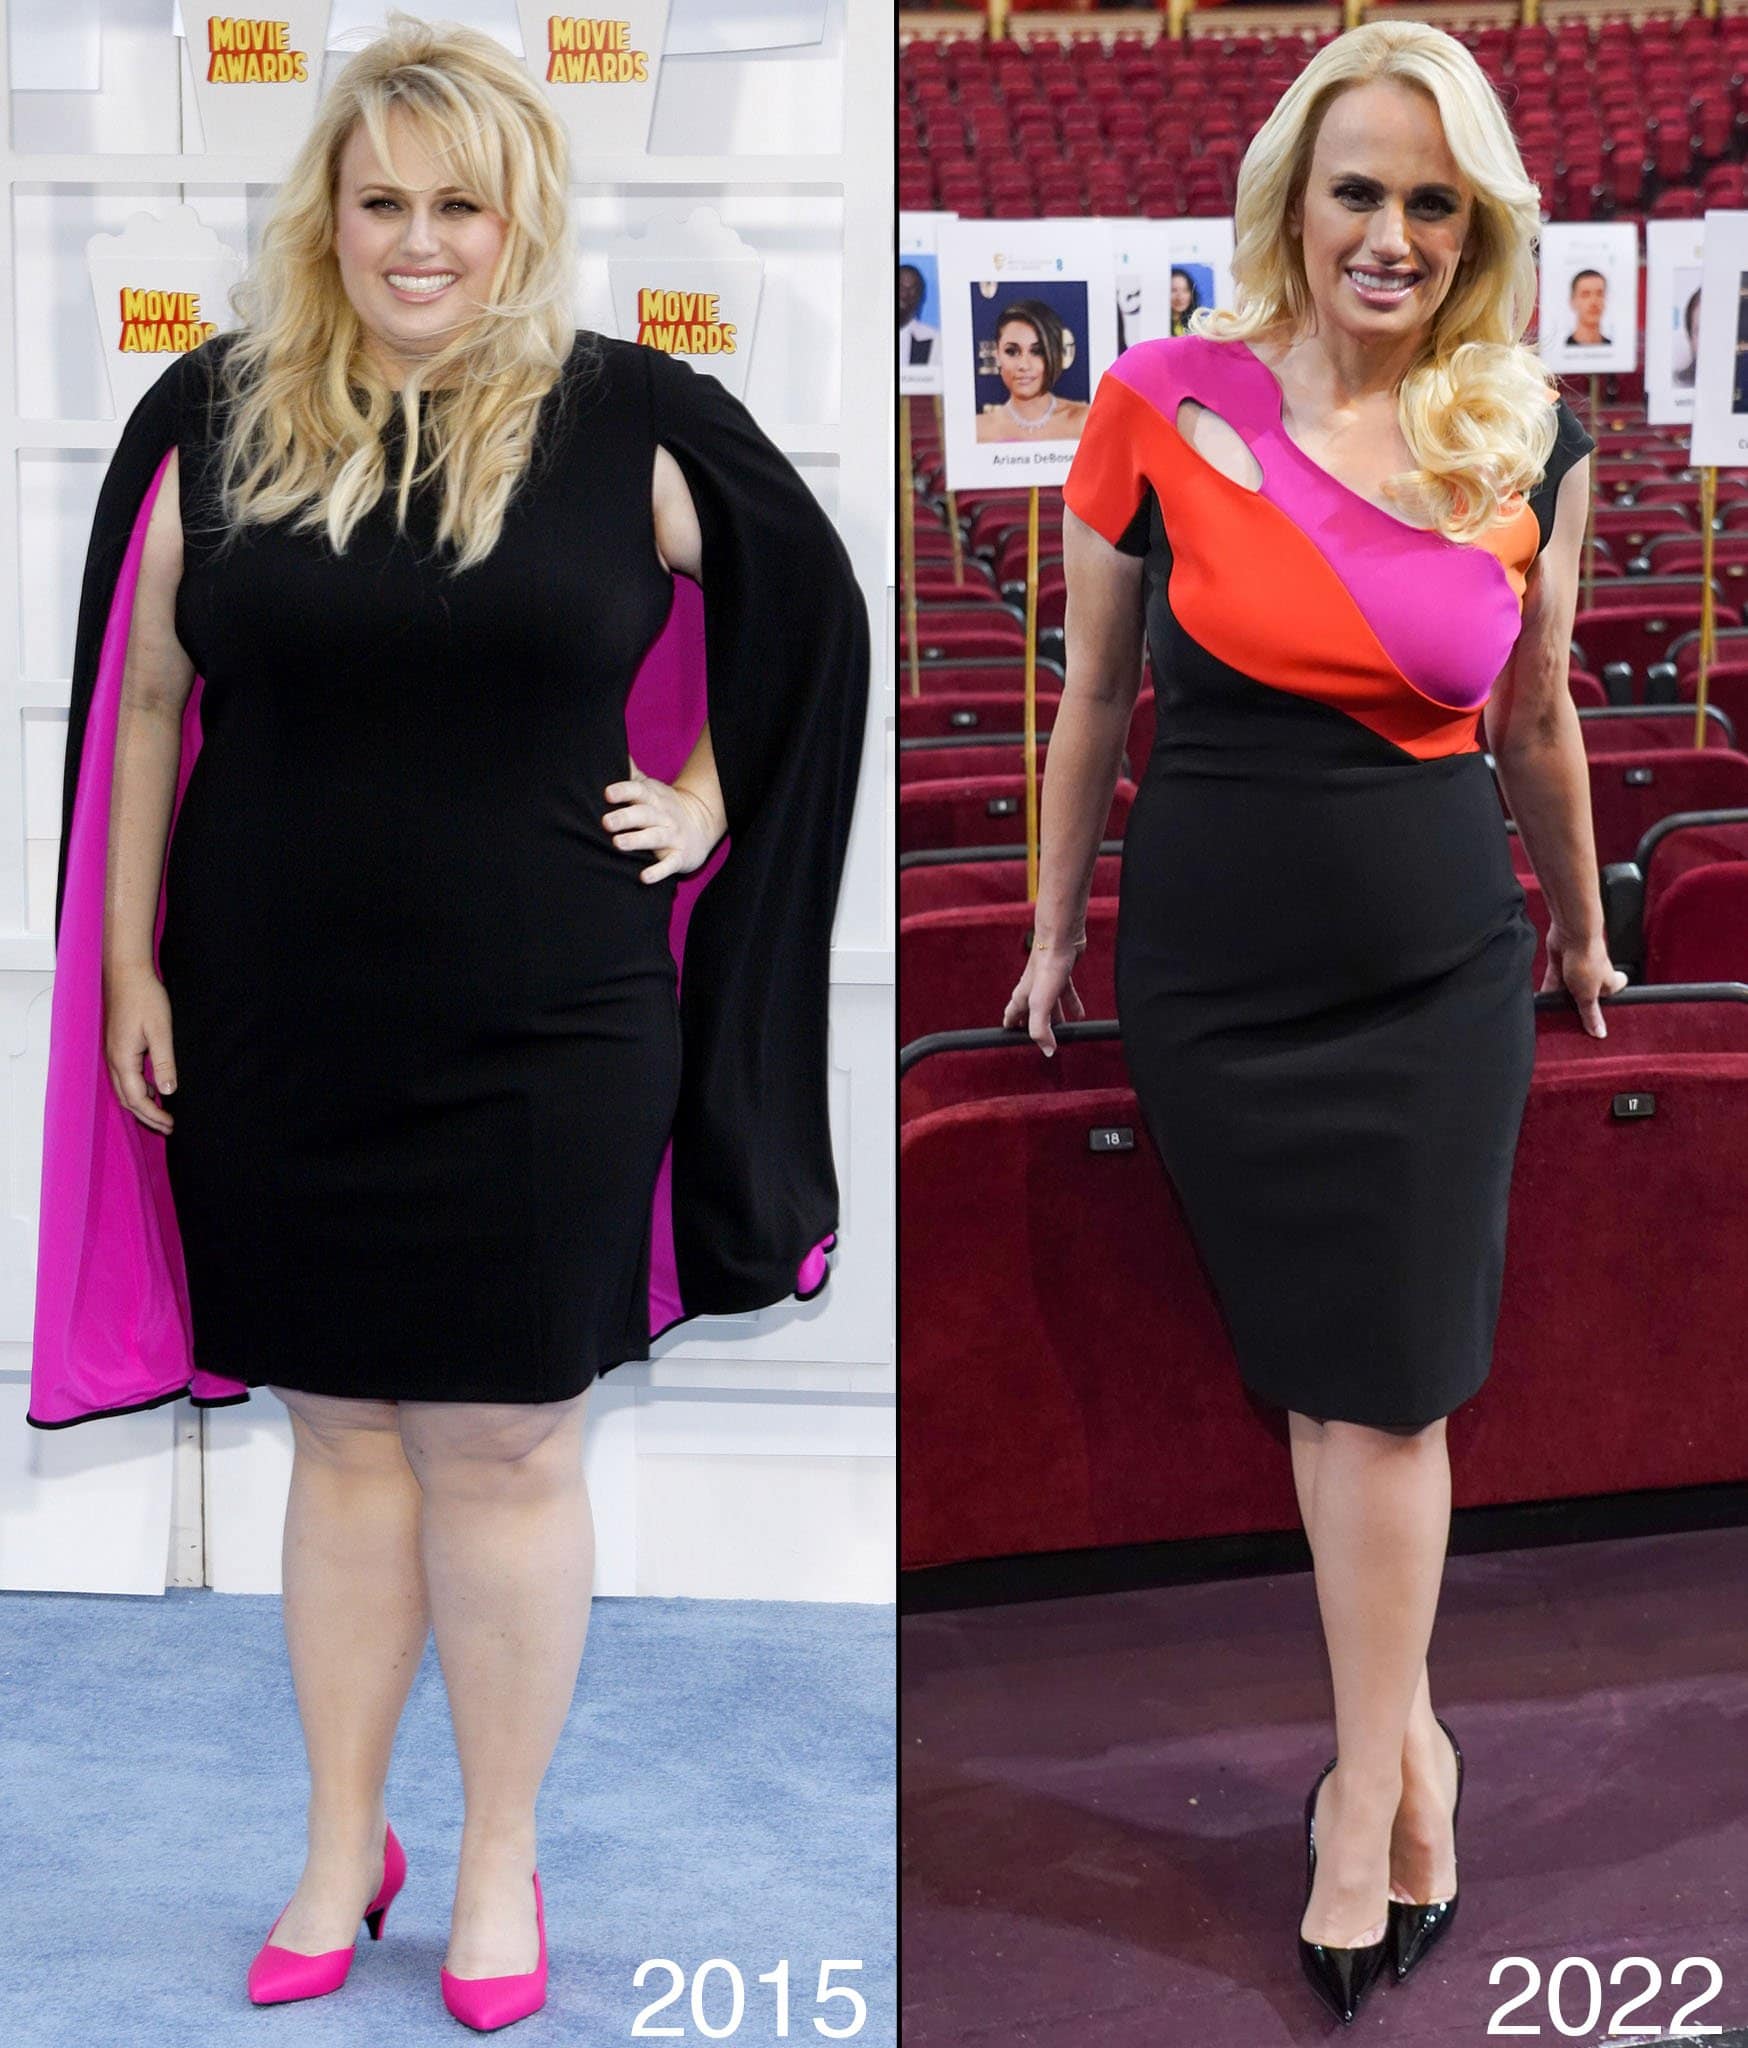 Rebel Wilson lost around 60 pounds to reach her goal weight and is now focusing on "maintenance"